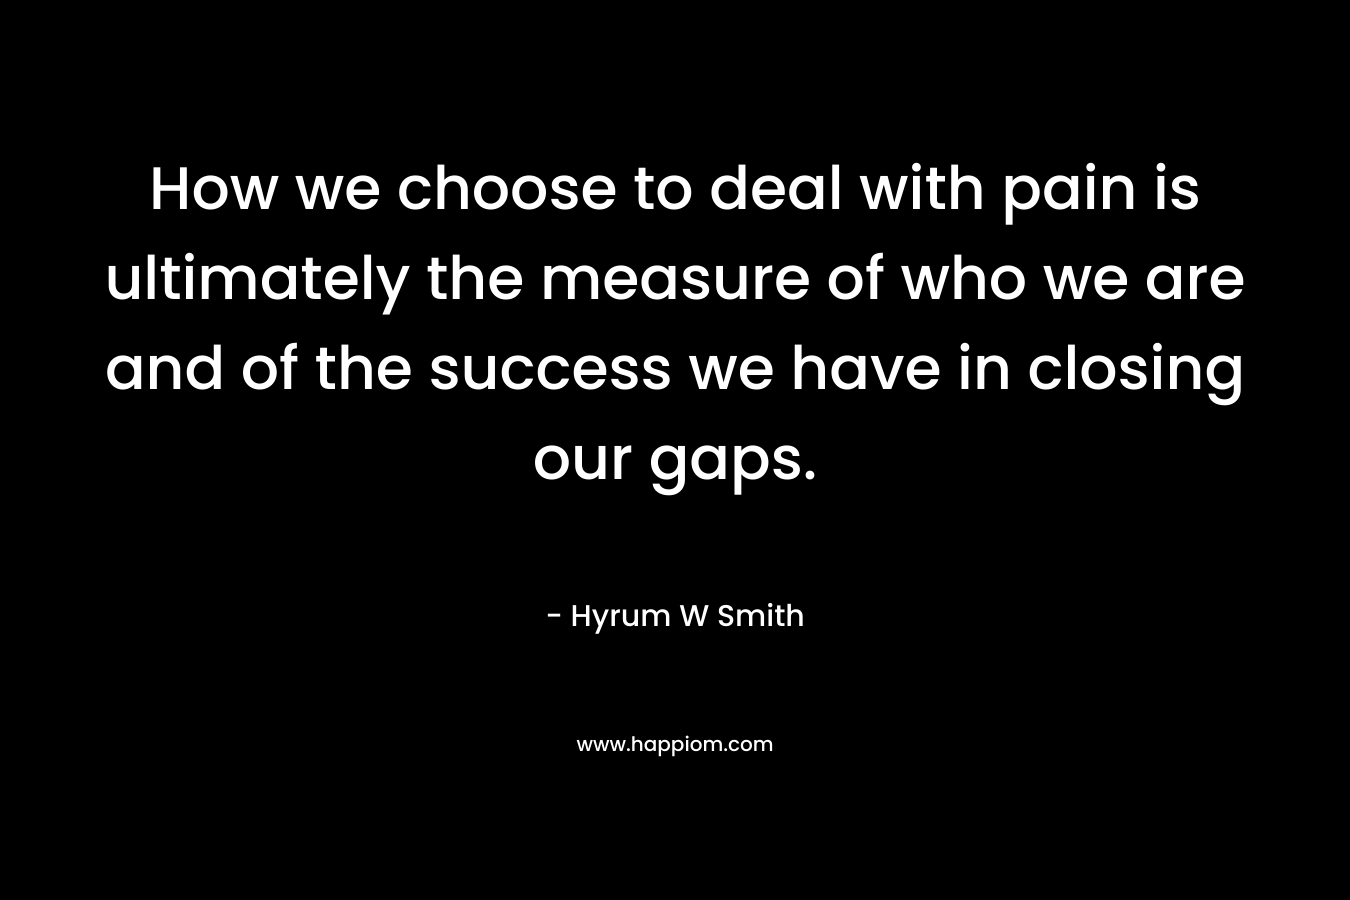 How we choose to deal with pain is ultimately the measure of who we are and of the success we have in closing our gaps. – Hyrum W Smith